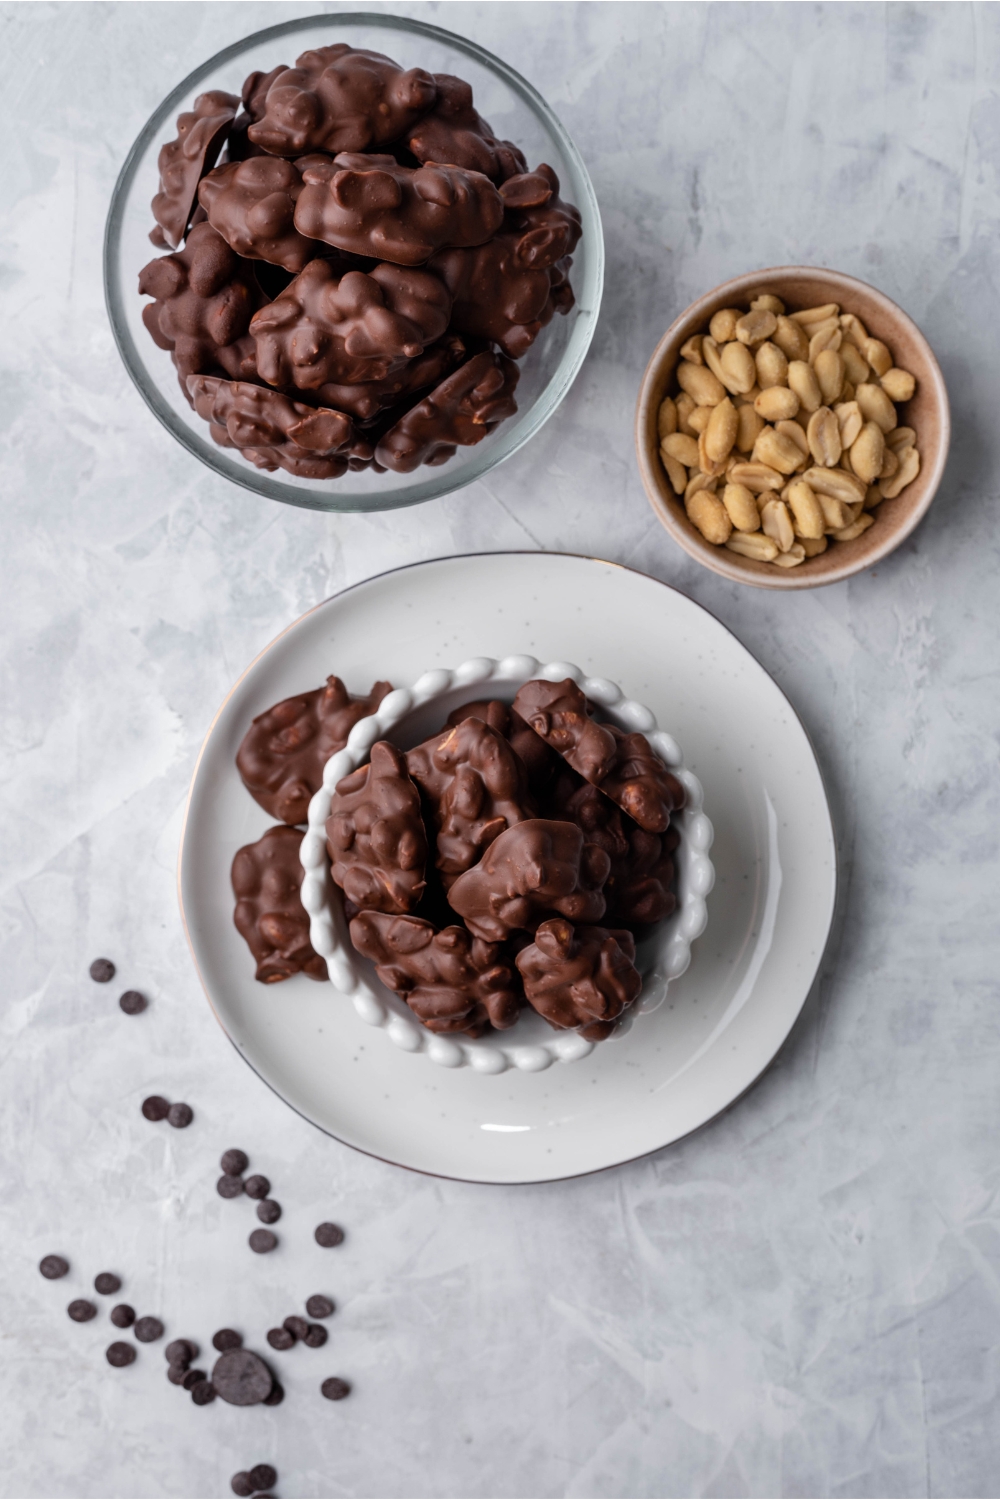 Overhead view of two bowls of chocolate peanut clusters and a bowl of peanuts. One bowl of clusters is atop a white plate with pieces falling over on the plate and chocolate chips are sprinkled on the counter.